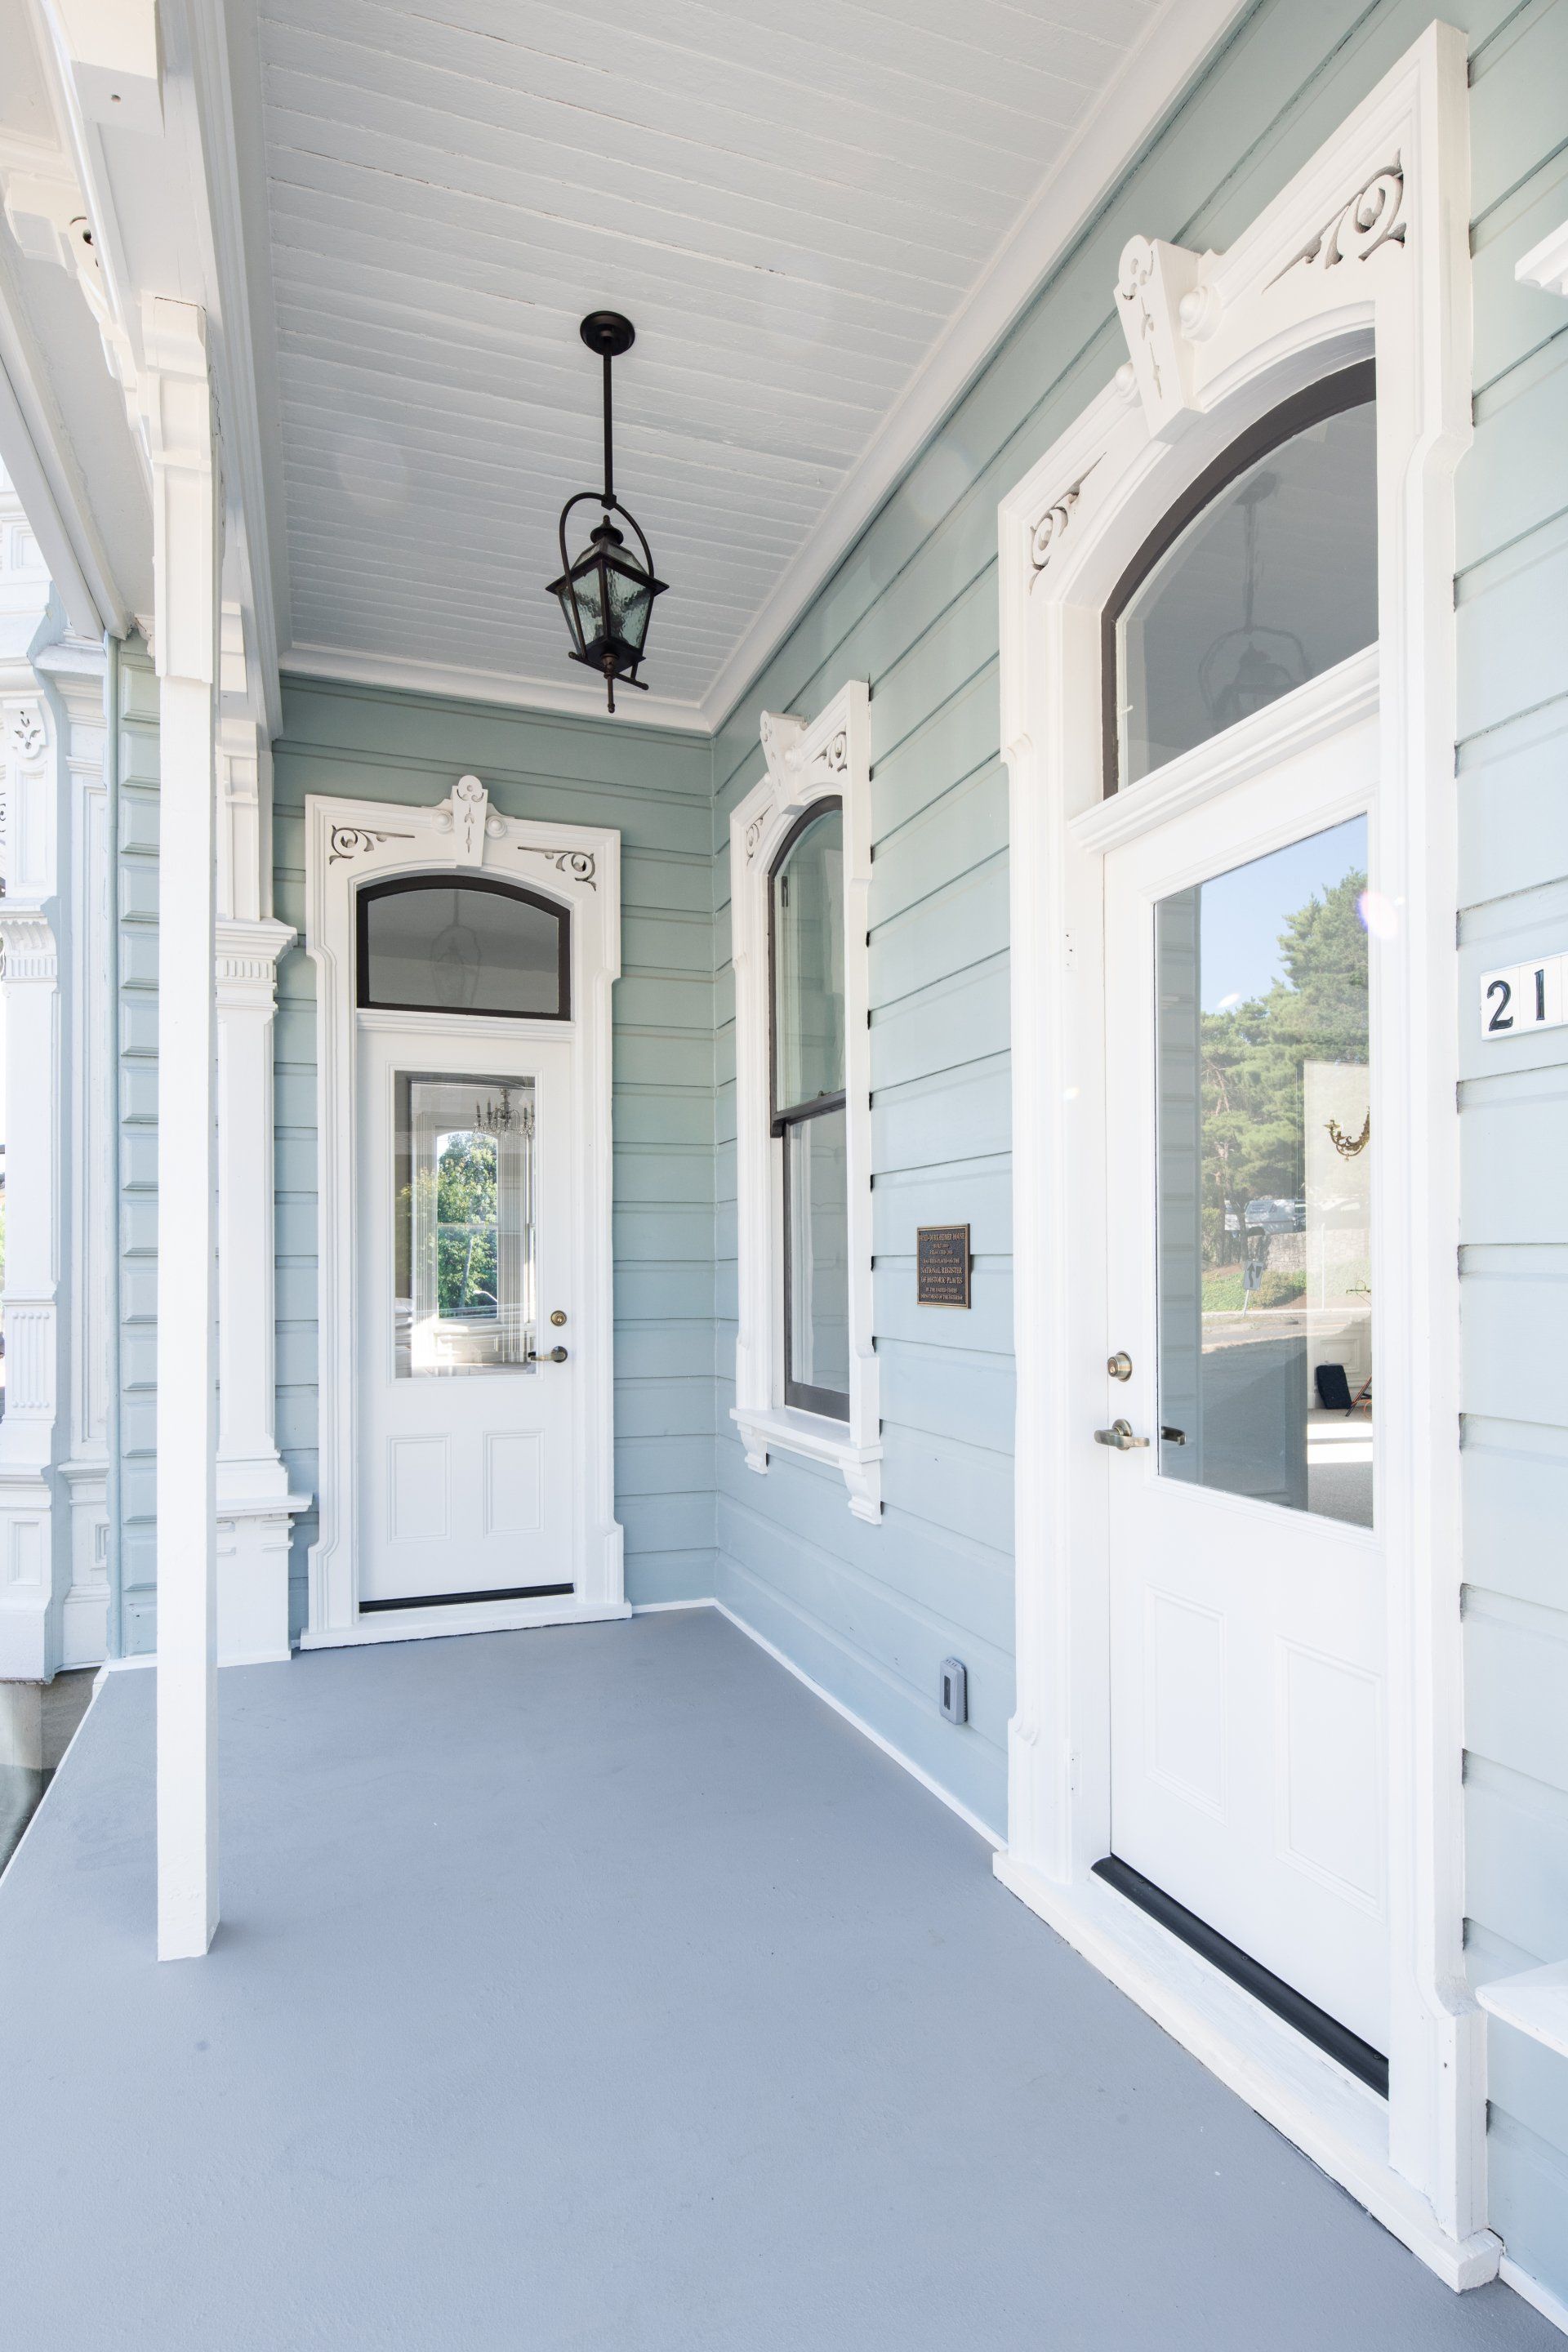 Italianate homes’ porches were restrained in size and decoration compared to other Victorian styles. Delicate posts and tall, slim windows boast scroll brackets, and quoining marks the outside corners of each facade. Photo by Erin Riddle of KLiK Concepts